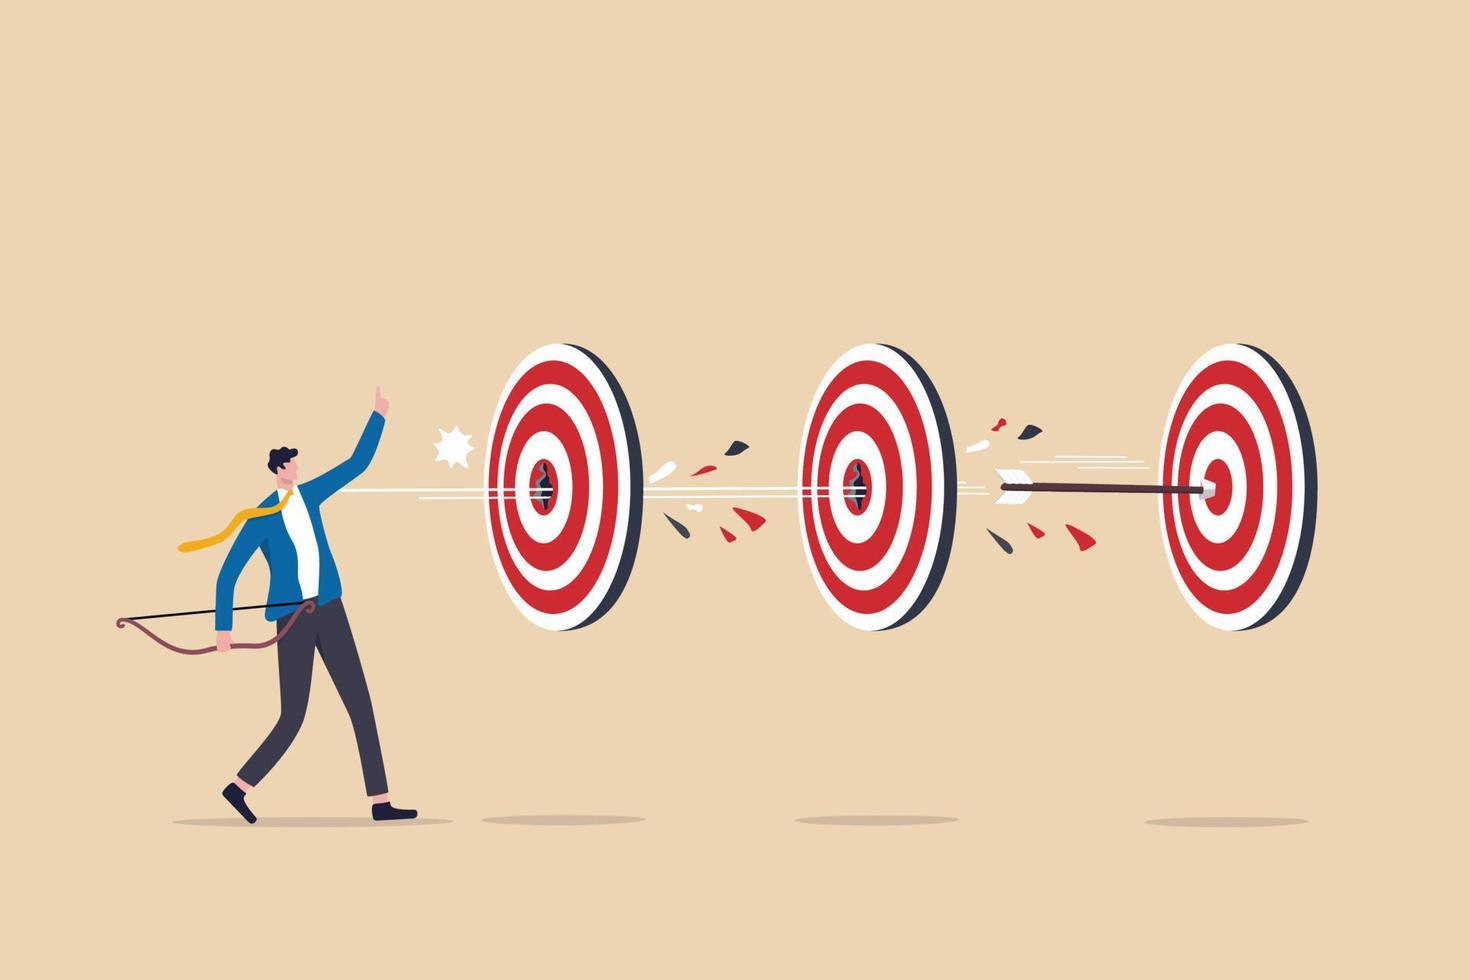 Completed multiple tasks with single action, business advantage or efficiency to success and achieve many targets with small effort, smart businessman archery hit multiple bullseye with single arrow. vector